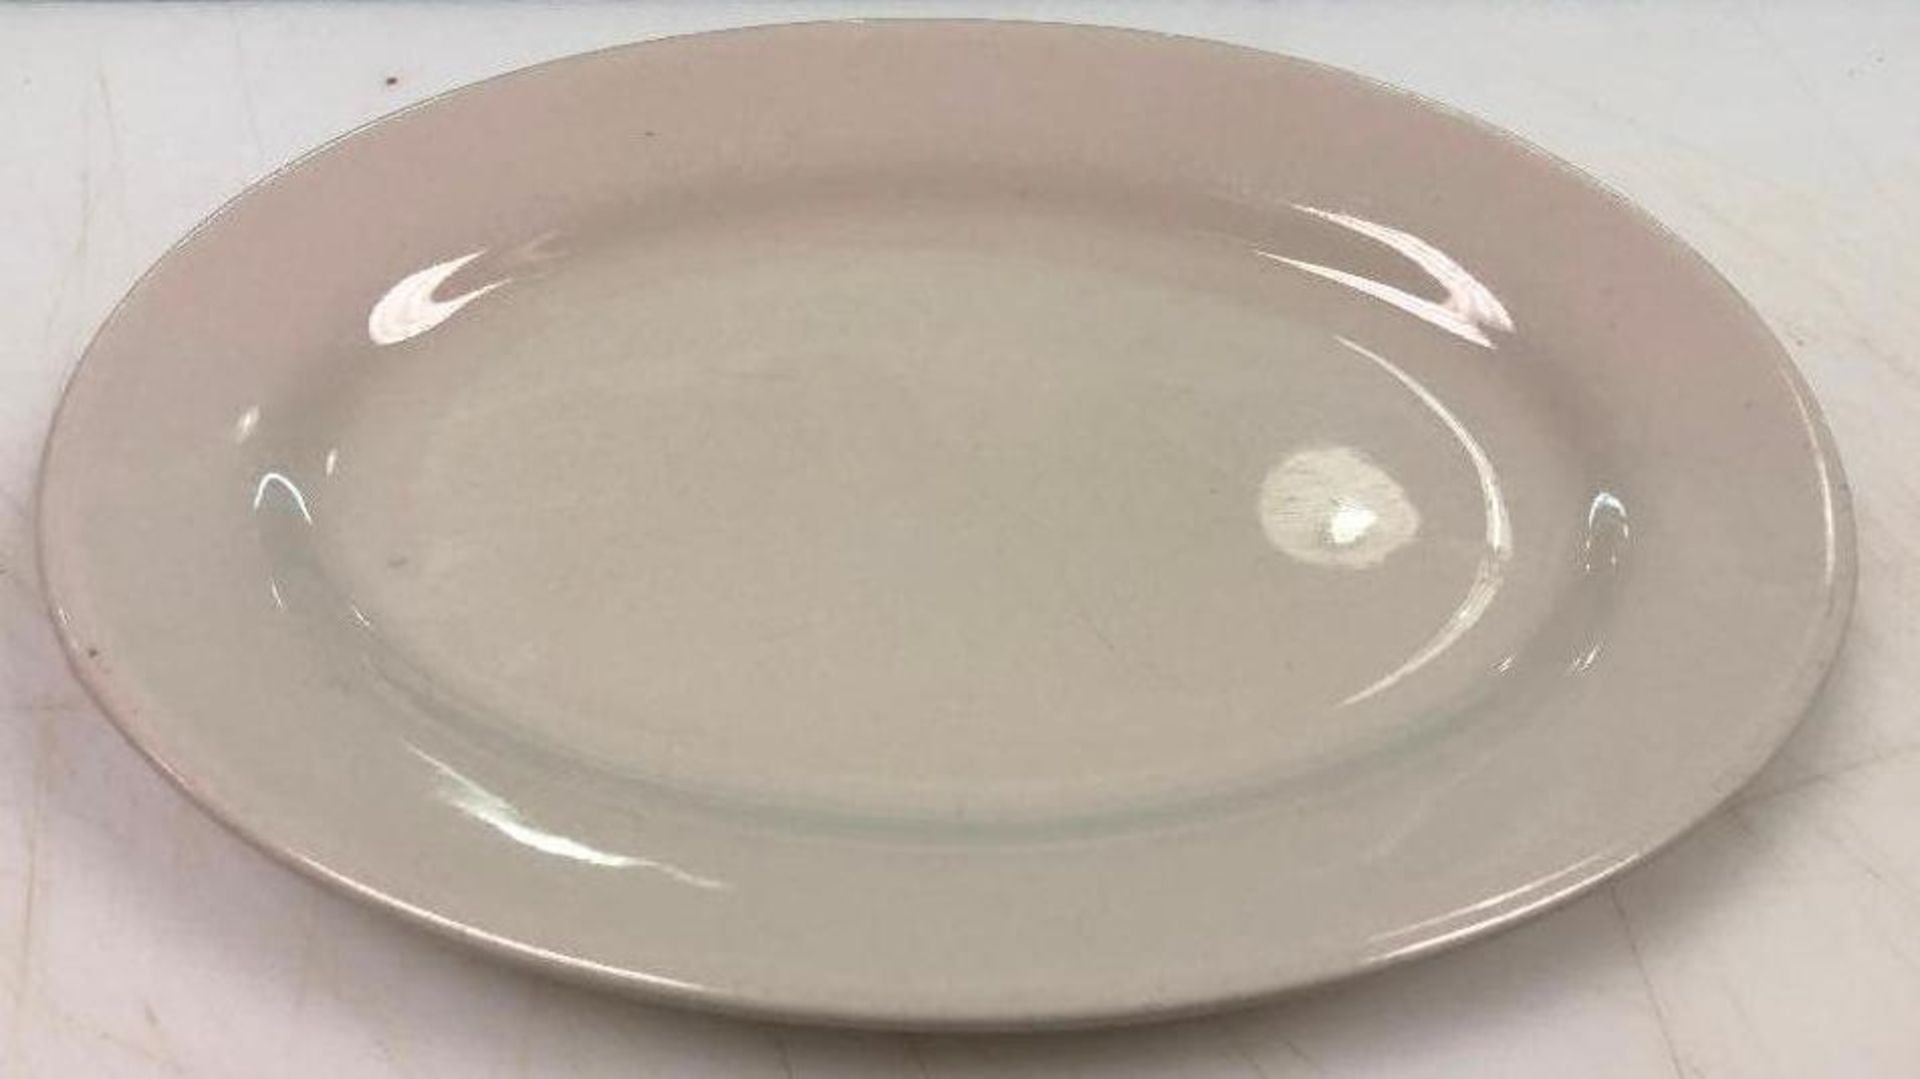 DESCRIPTION: (12) 10.25" CHINA PLATTERS SIZE: 10.25" LOCATION: KITCHEN THIS LOT IS: SOLD BY THE PIEC